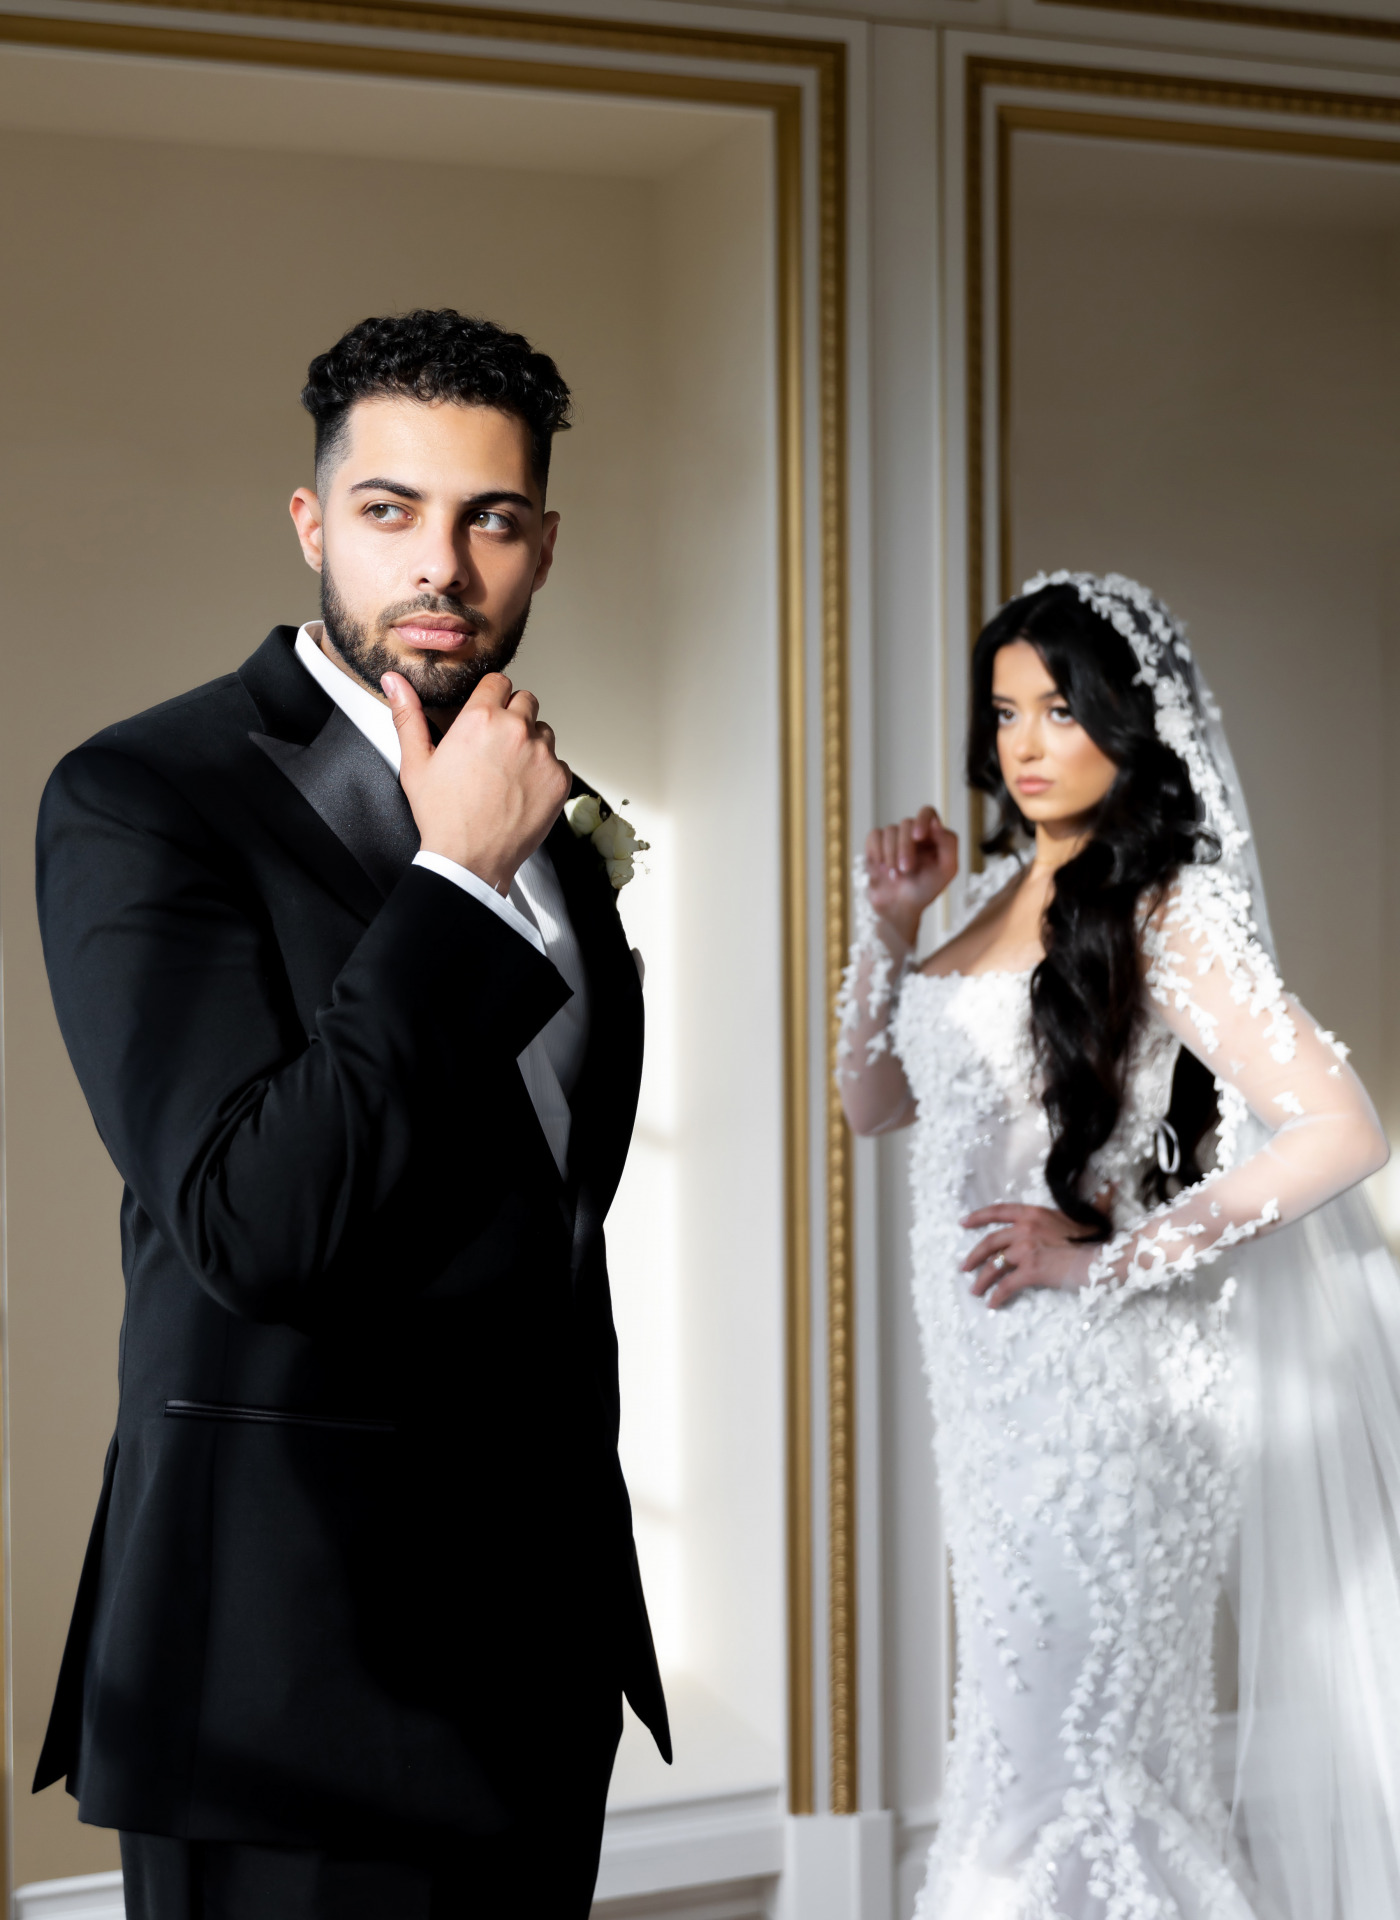 Egyprian coptic wedding editorial style in New Jersey 61